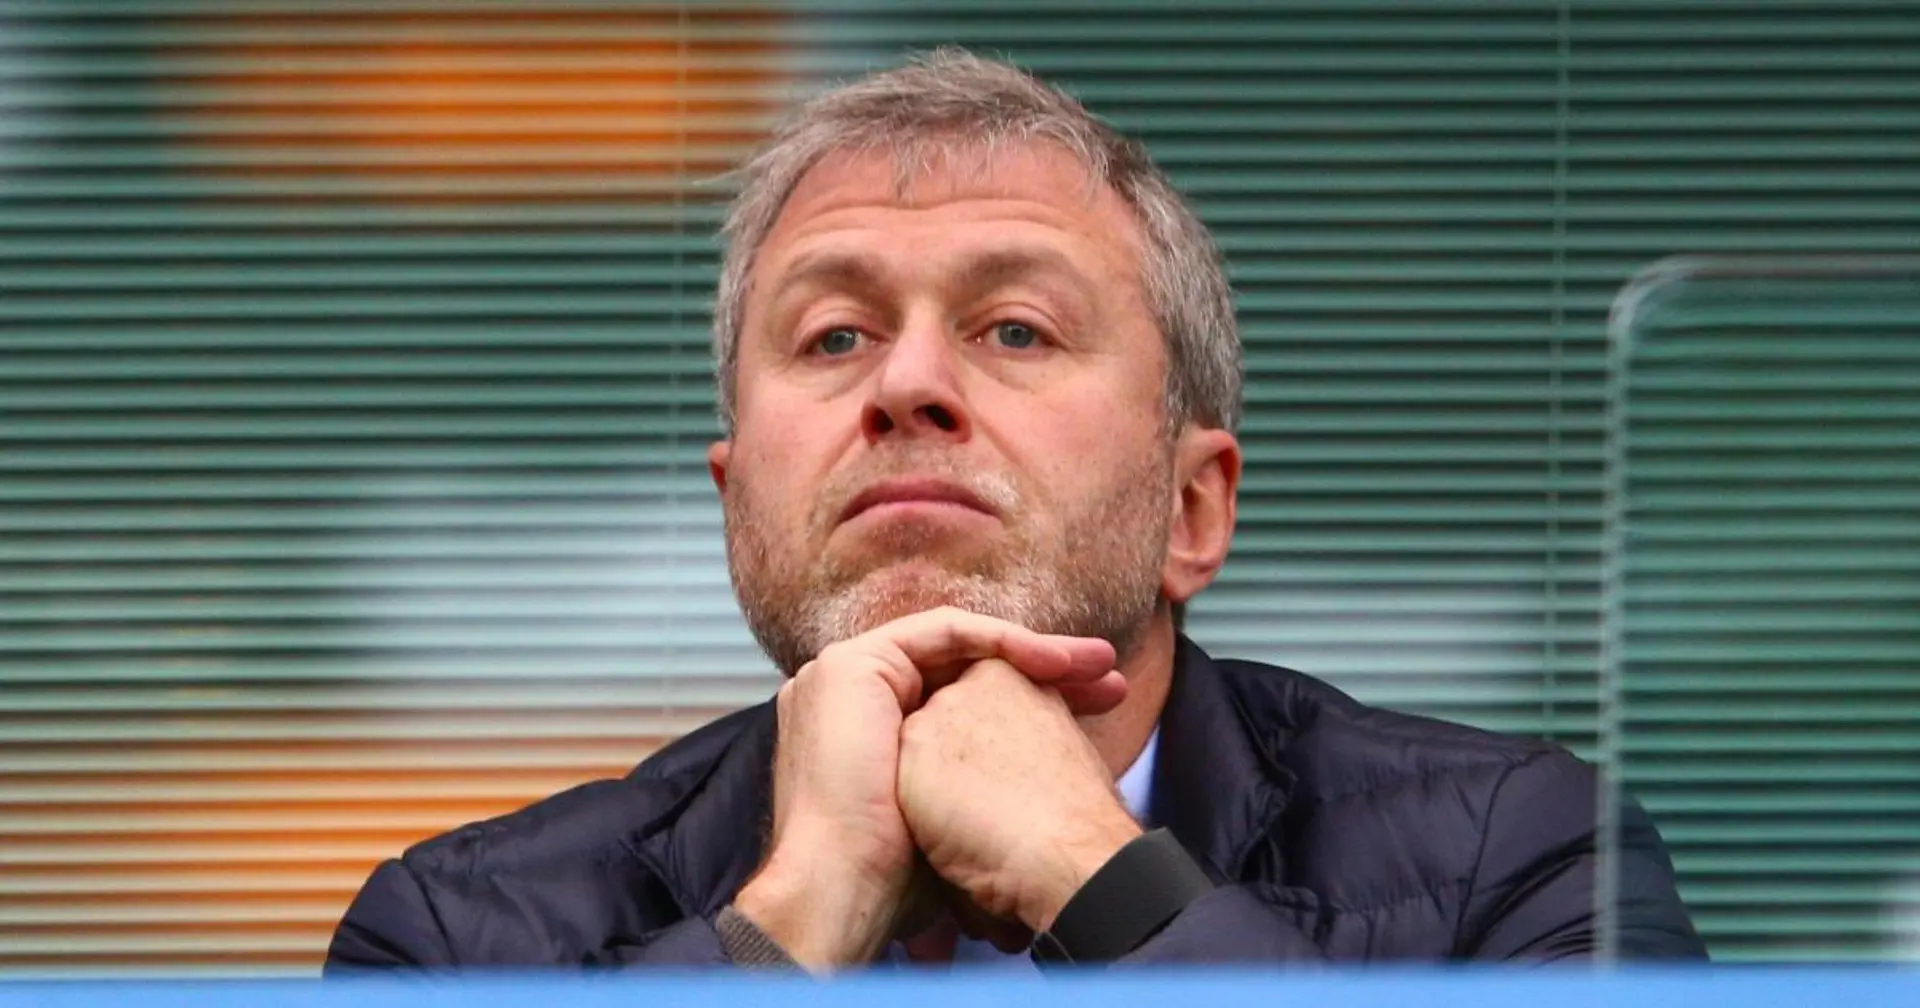 Roman Abramovich puts Chelsea up for sale, asking price revealed - The Telegraph